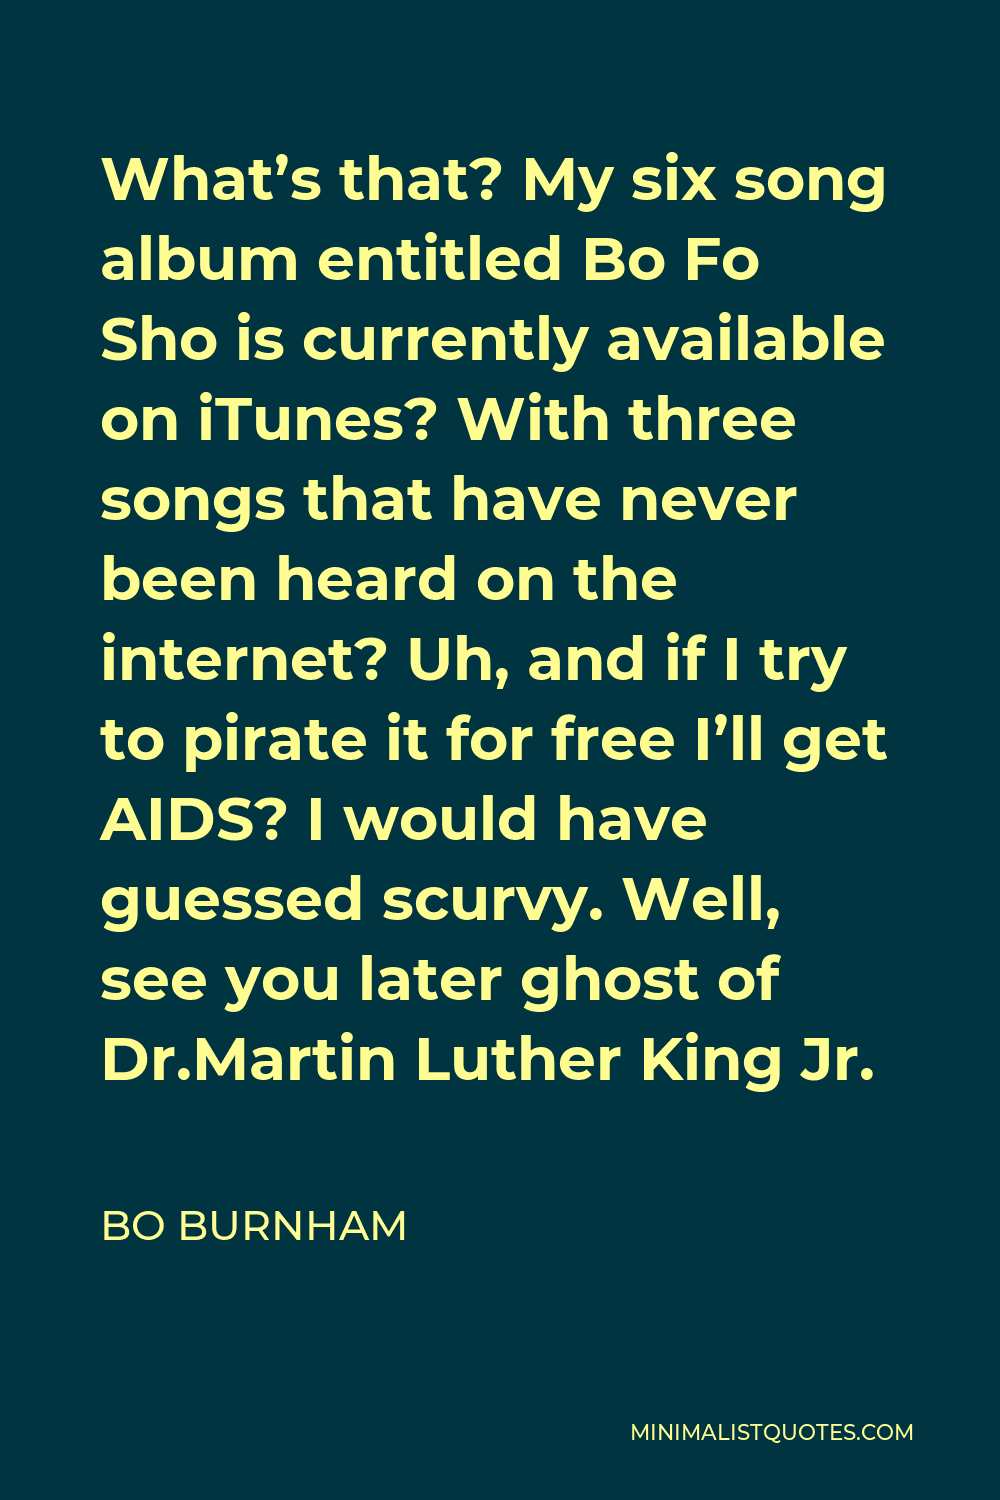 Bo Burnham Quote - What’s that? My six song album entitled Bo Fo Sho is currently available on iTunes? With three songs that have never been heard on the internet? Uh, and if I try to pirate it for free I’ll get AIDS? I would have guessed scurvy. Well, see you later ghost of Dr.Martin Luther King Jr.